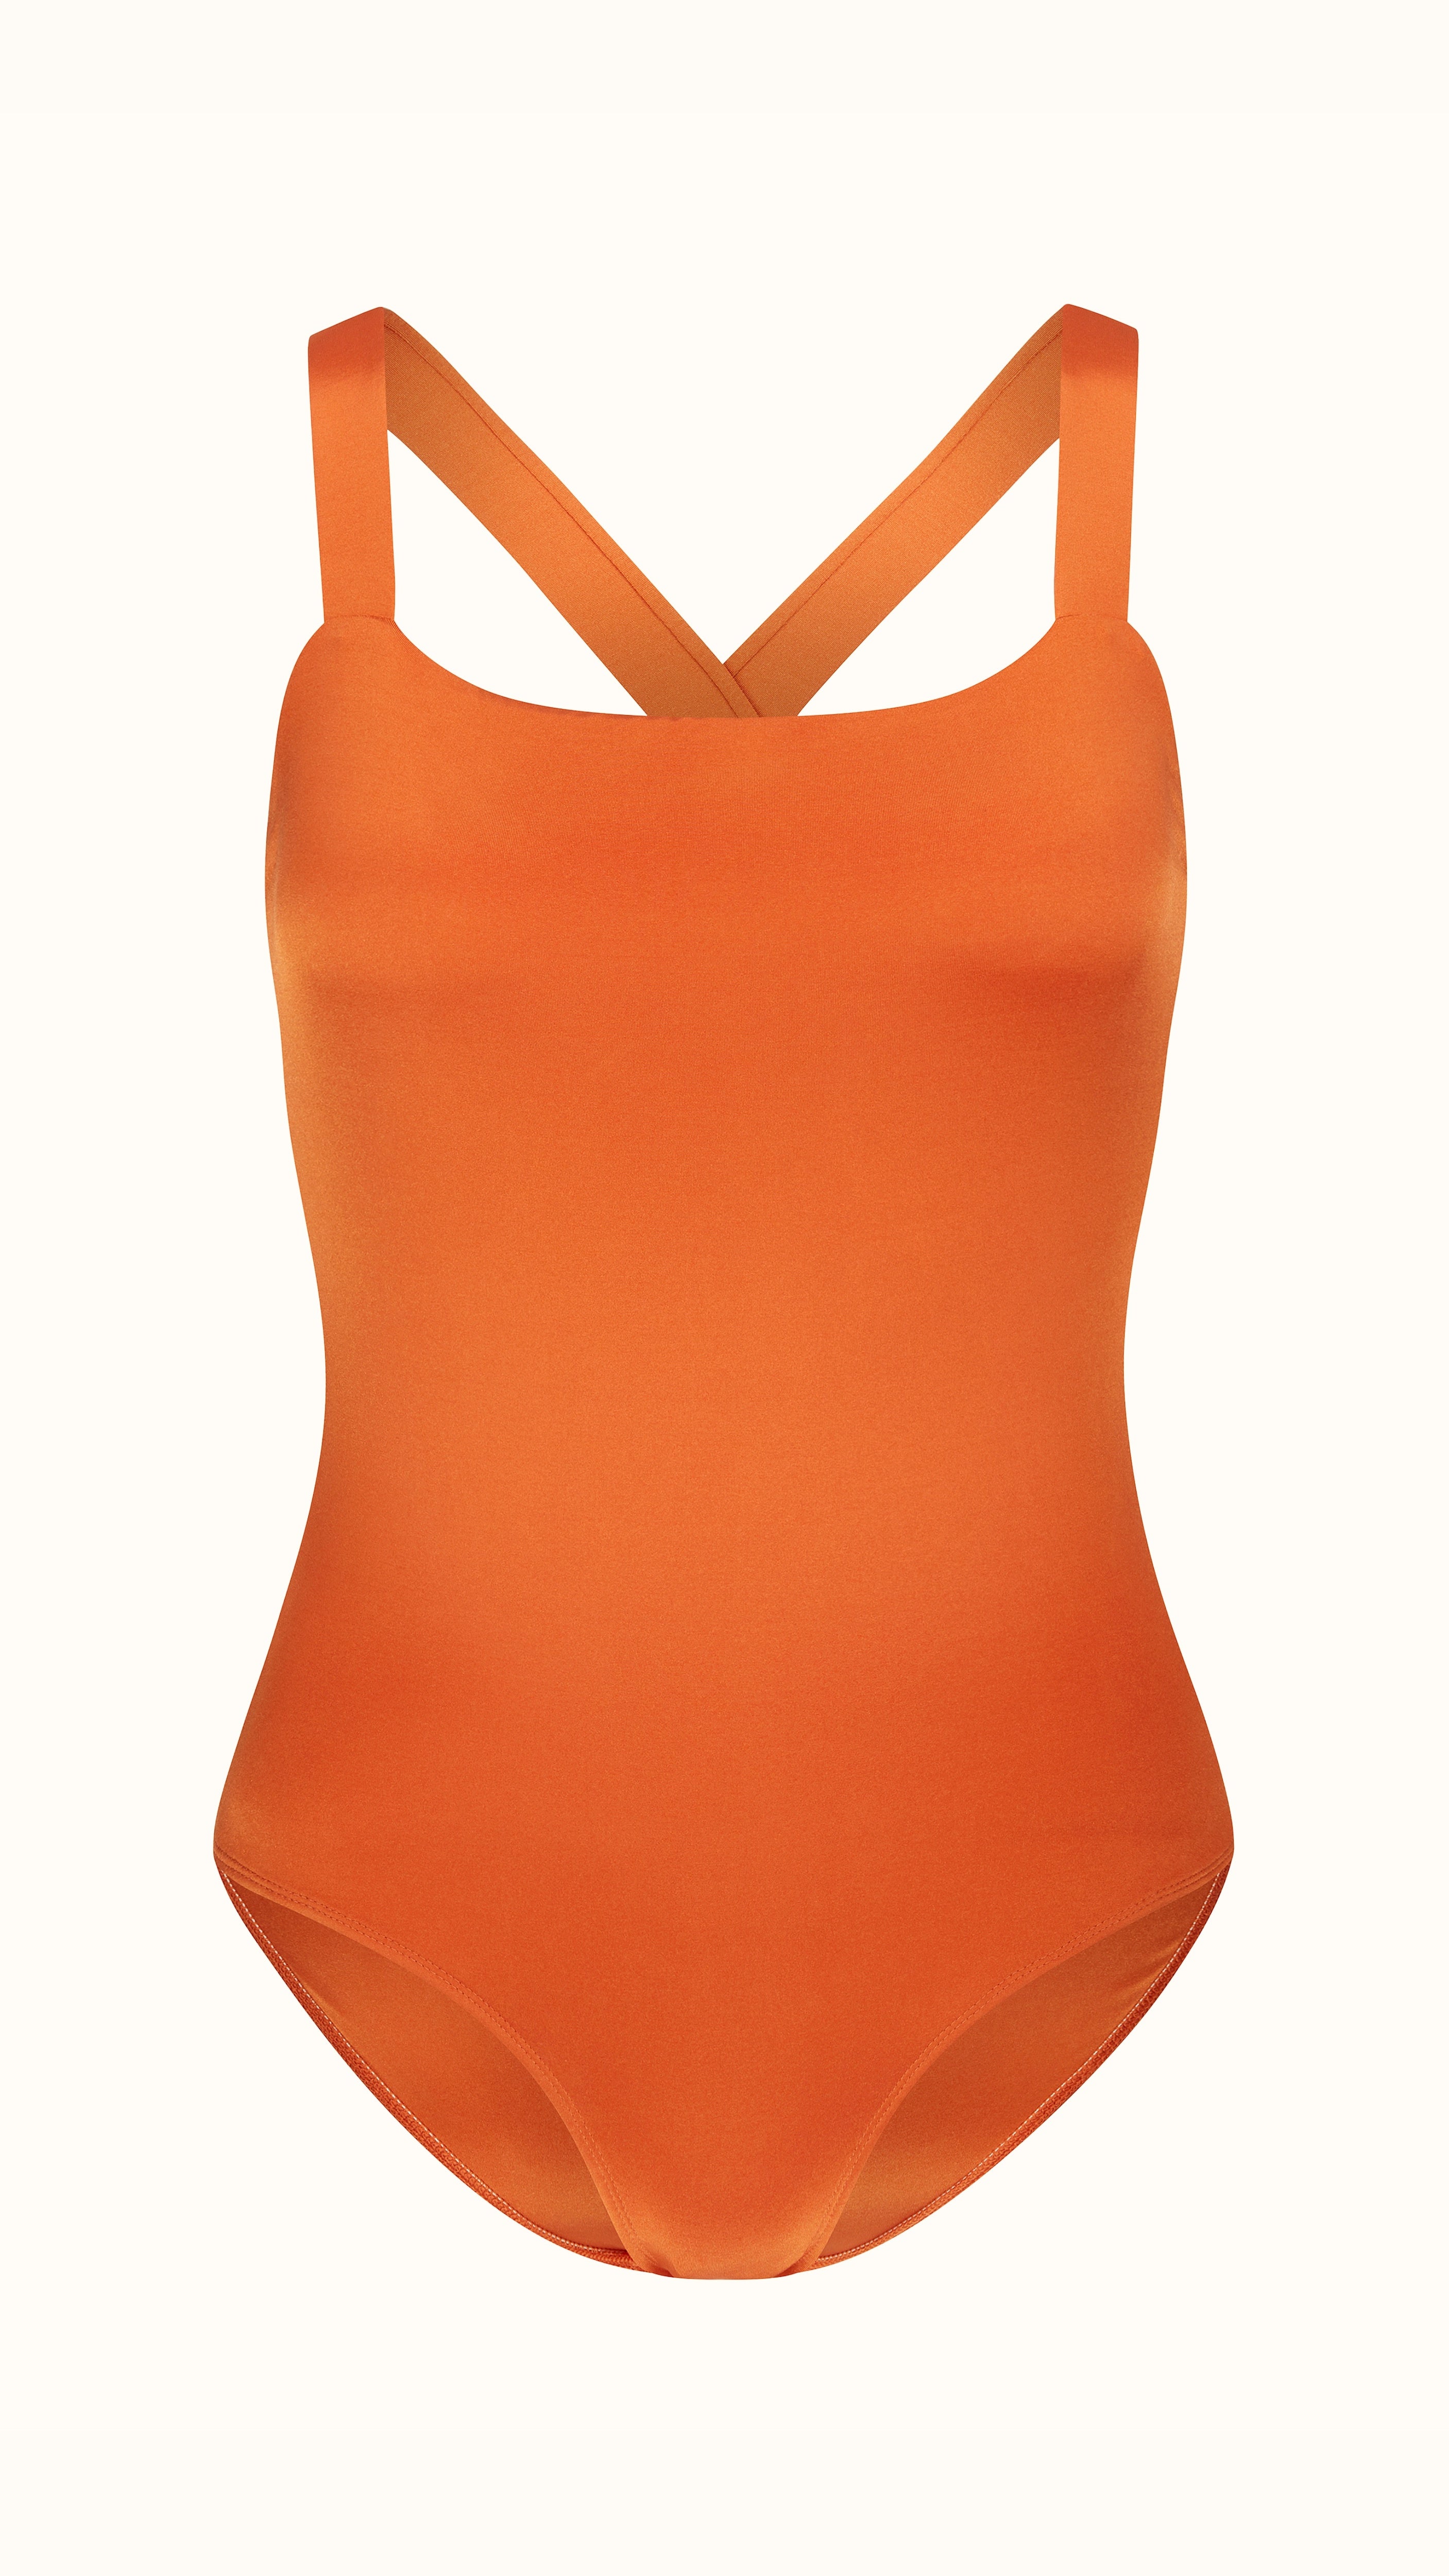 Talia Collins Cross Back Swimsuit in Terracotta Orange. Sustainable swimwear made from recycled materials. One piece classic swimsuit style with cross straps in the back. Scoop neck with full coverage bikini bathing suit top and bum coverage. Experience 27 Madrid. Product photo front view.